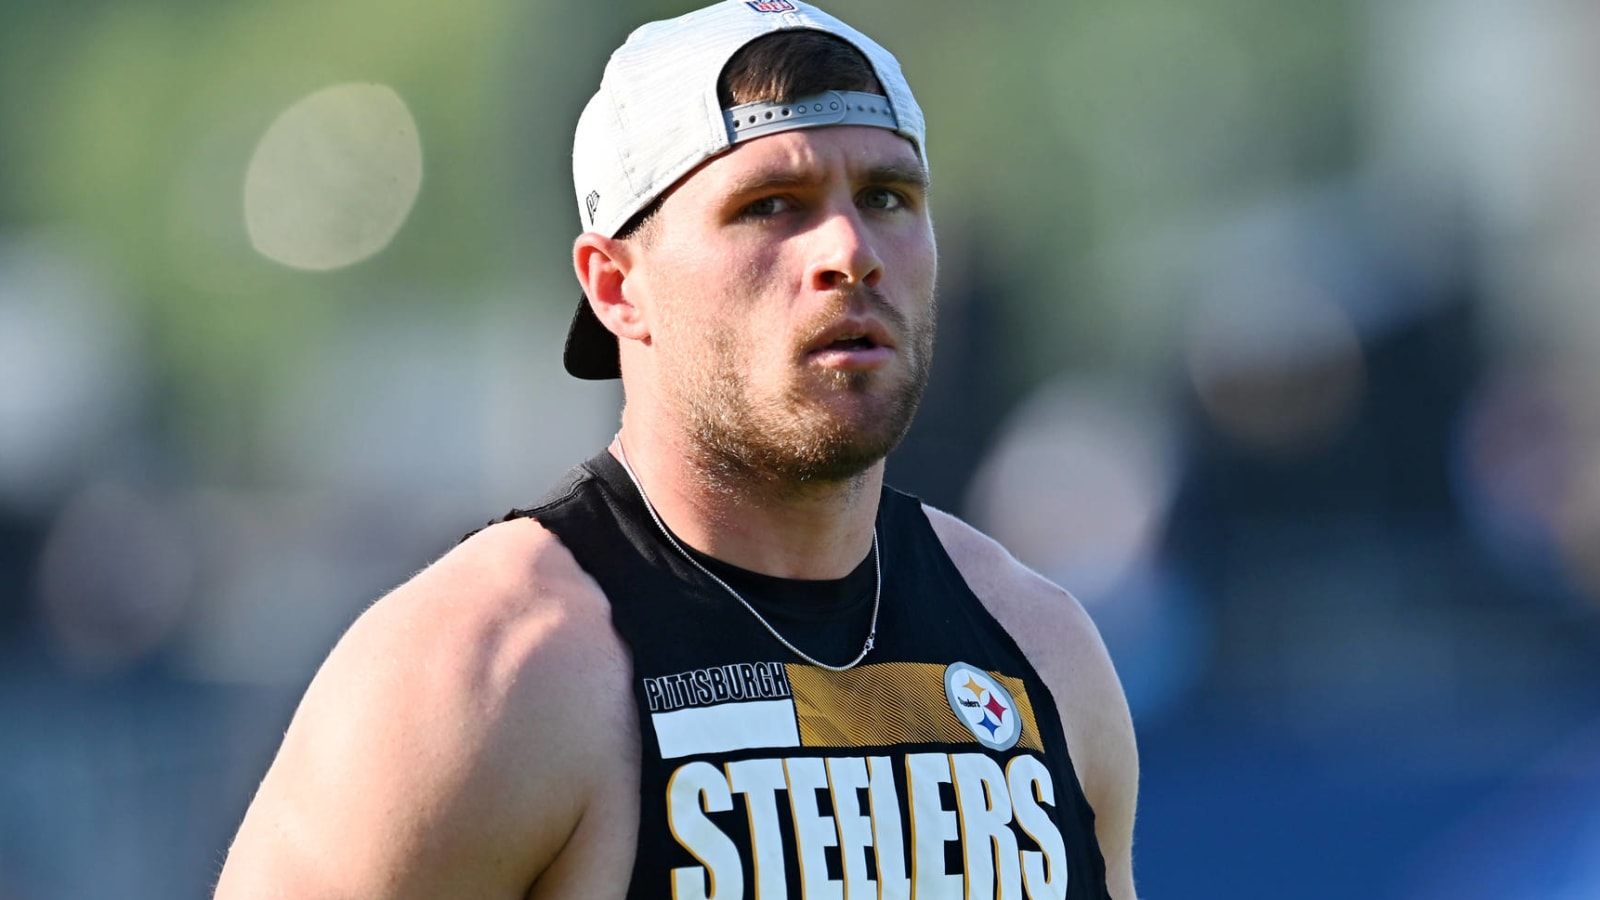 Steelers are being foolish with T.J. Watt negotiations